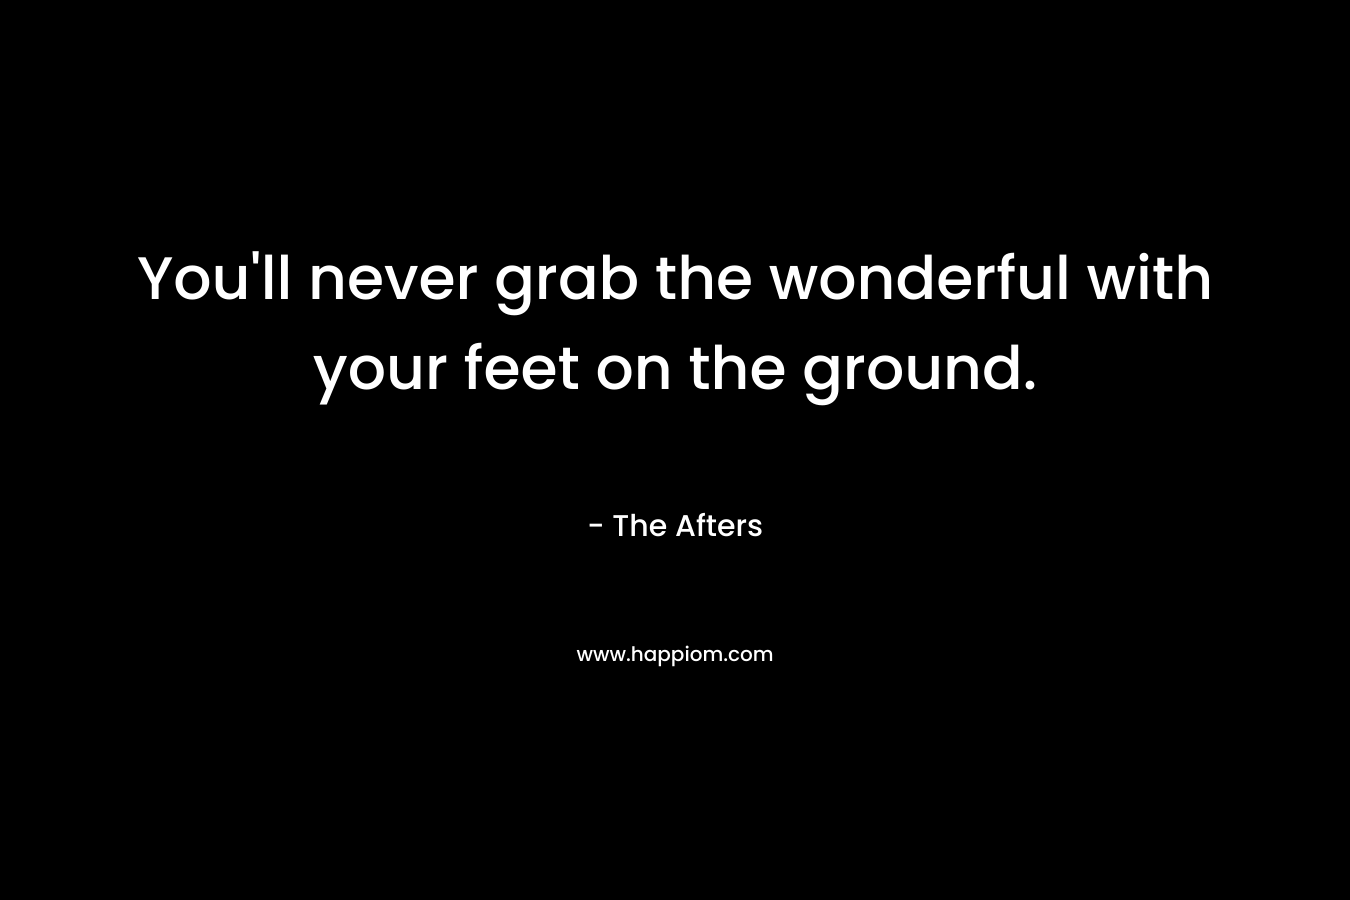 You'll never grab the wonderful with your feet on the ground.